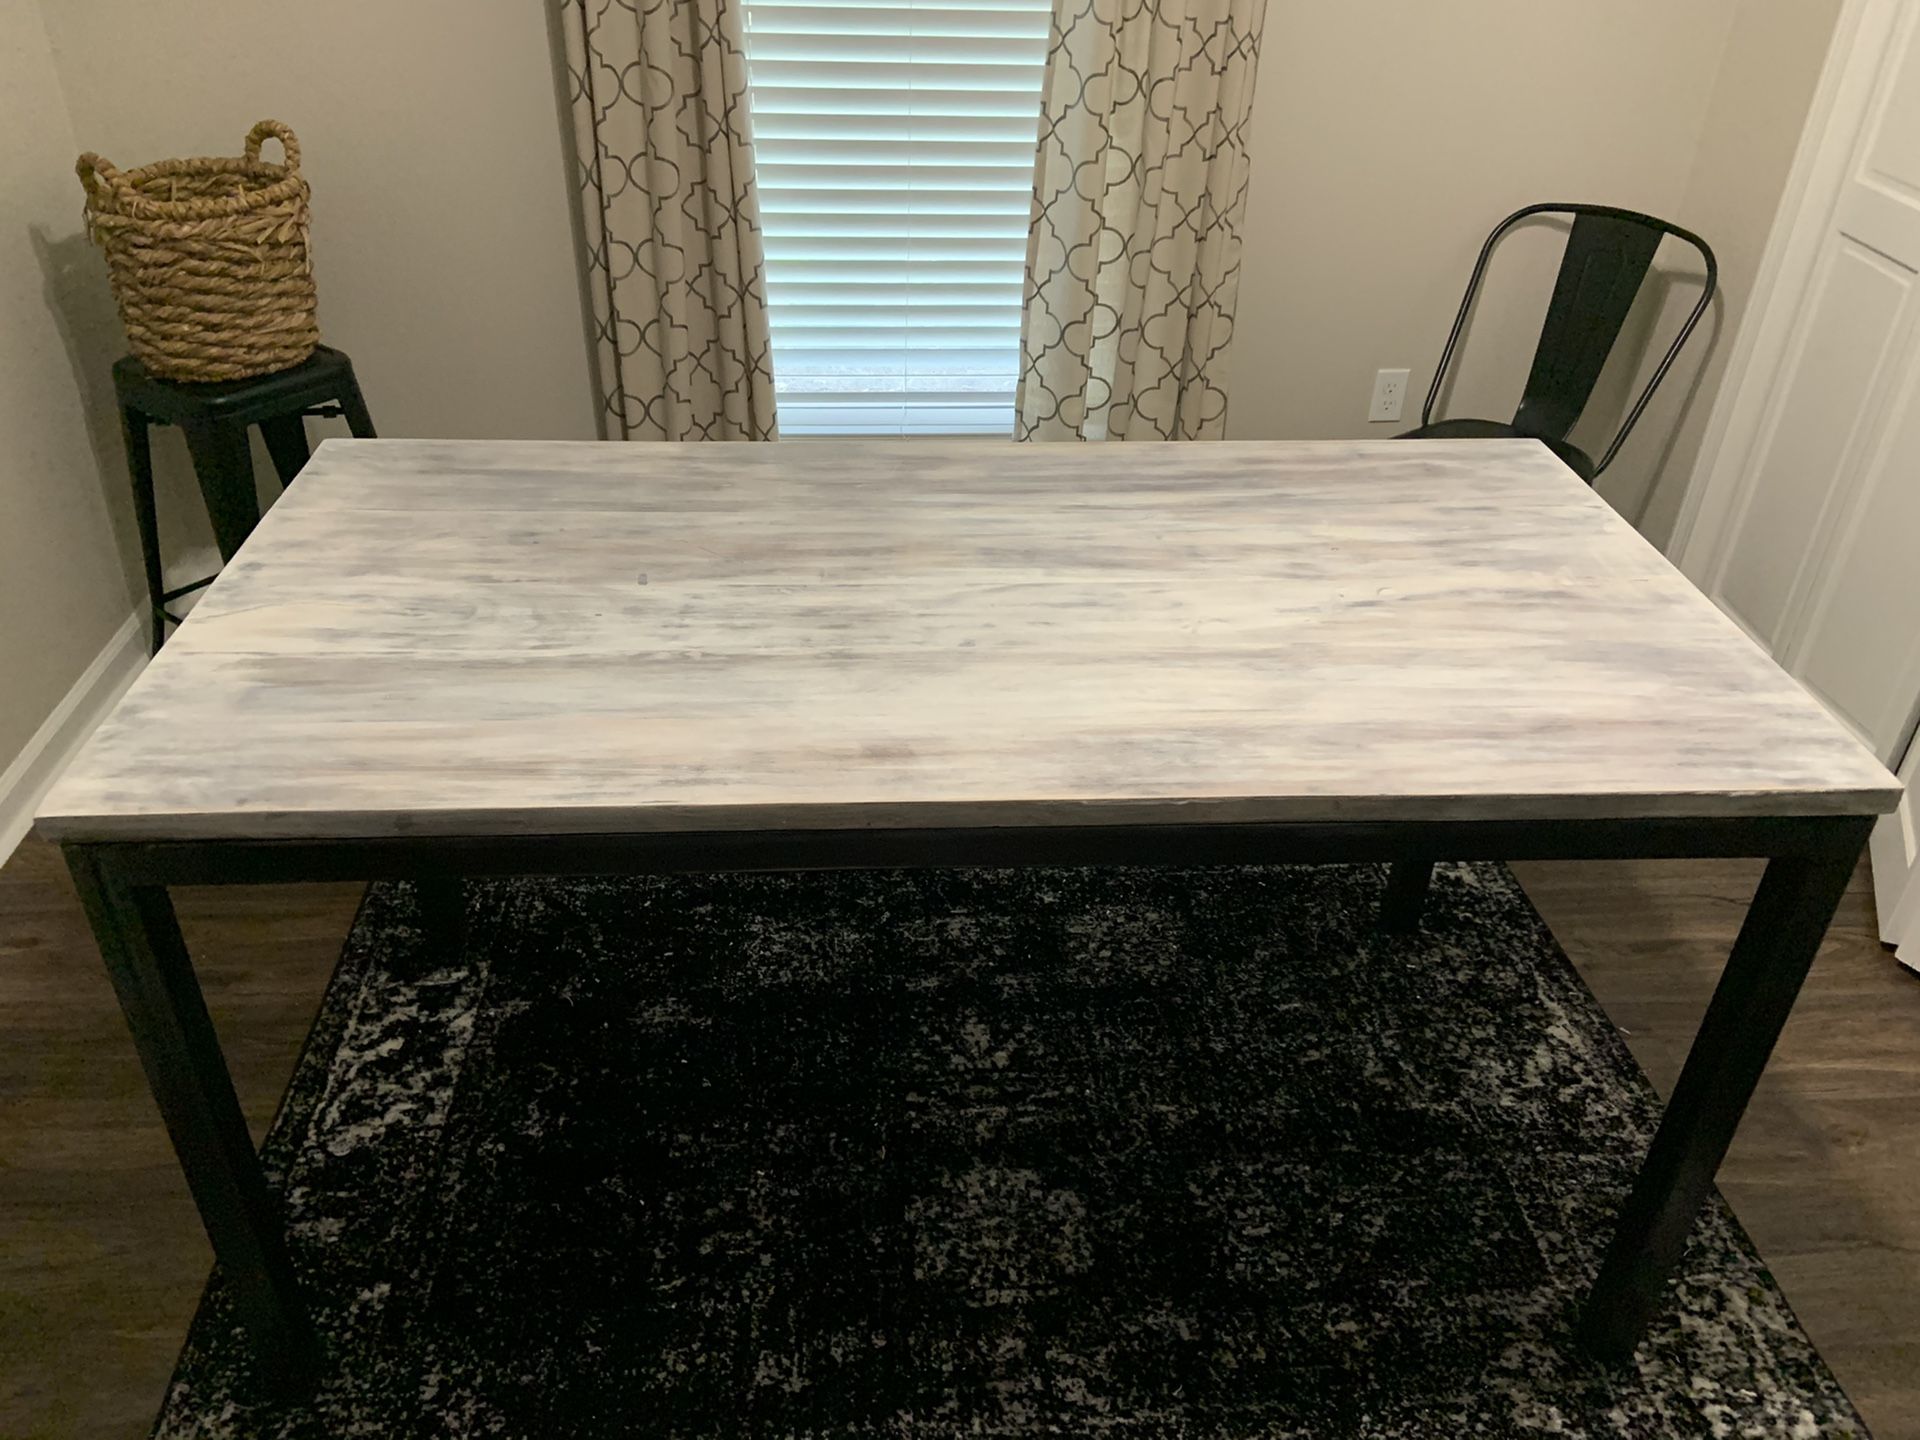 White-washed, solid wood + iron Nadeau dining table / desk